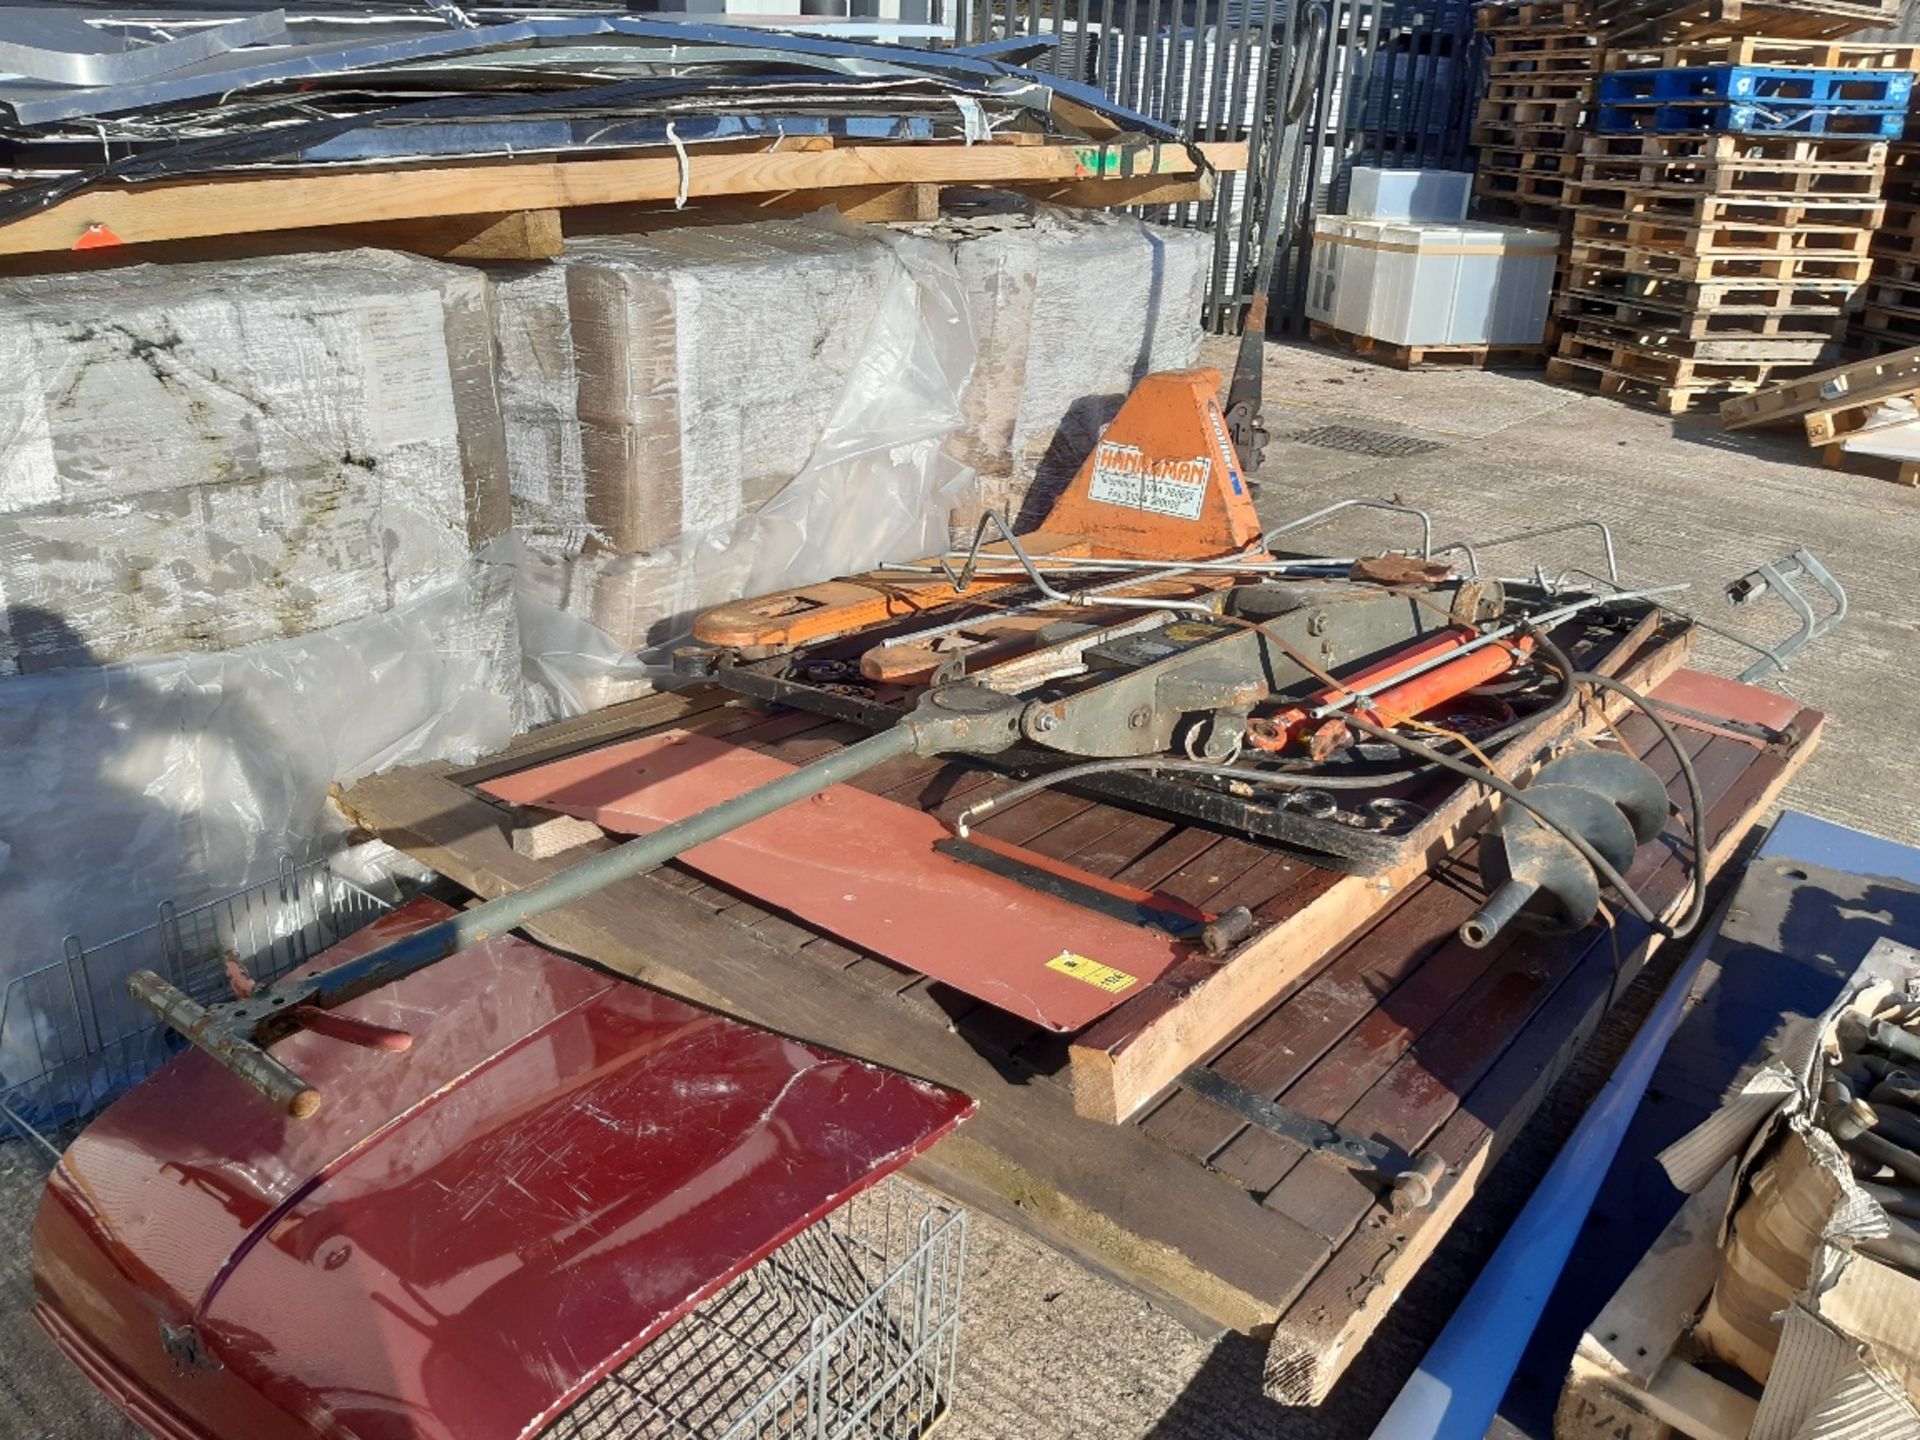 MISC LOT TO INCLUDE PUMP TRUCKS (EURO LIFTER) , CAR JACK , LARGE BARM DOORS , PLY WOOD , METAL GATES - Image 2 of 2